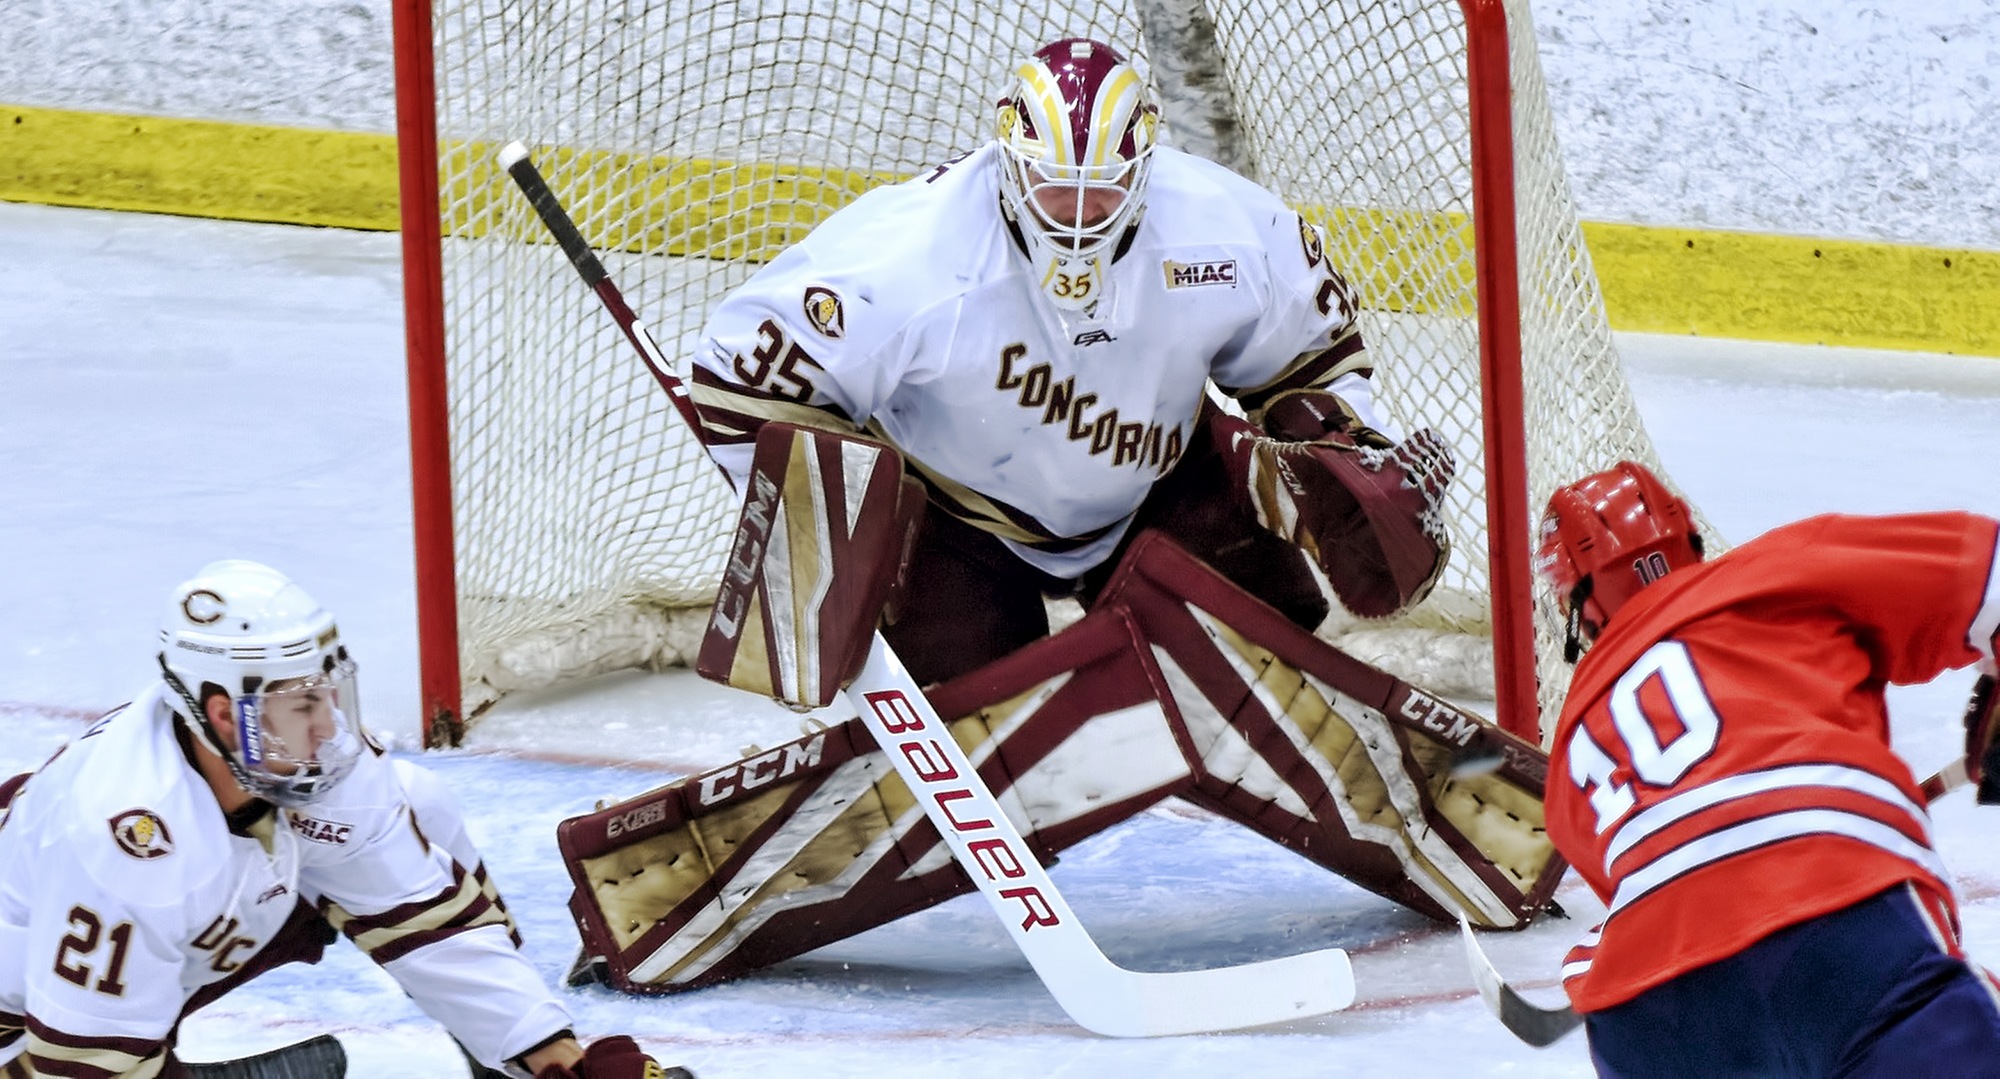 Junior goalie Cam Haugenoe made a career-high 50 saves in the Cobbers' 2-2 OT tie at Northland.